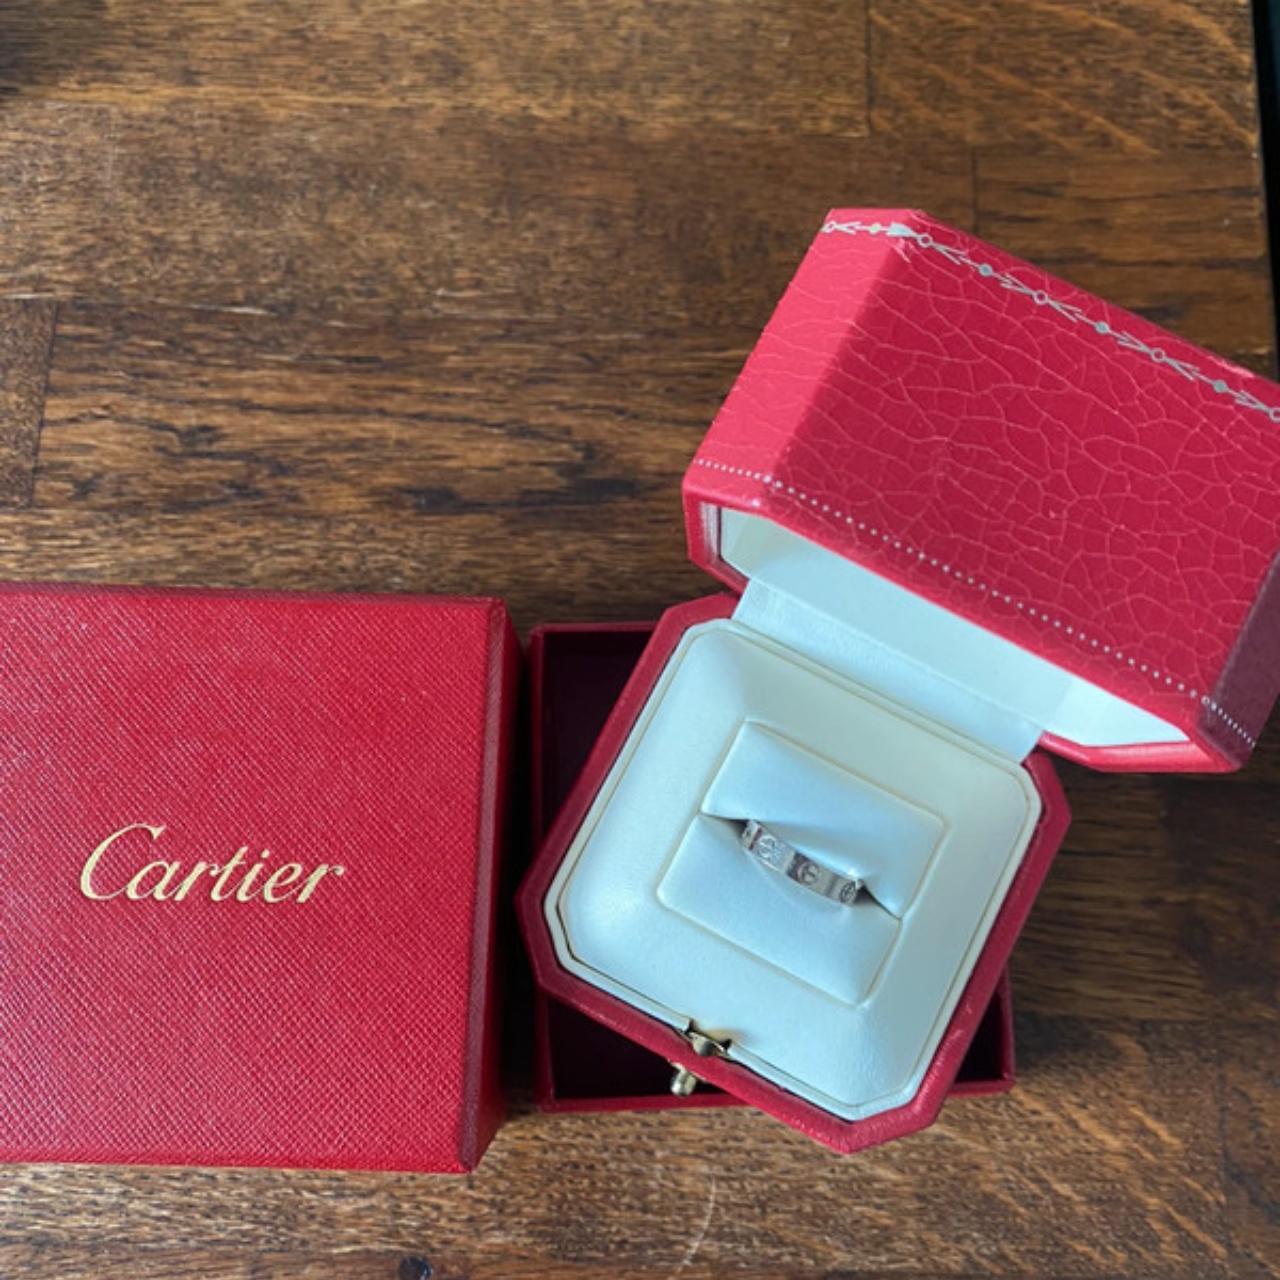 Original Cartier Love Ring white gold 47 Selling my... - Depop